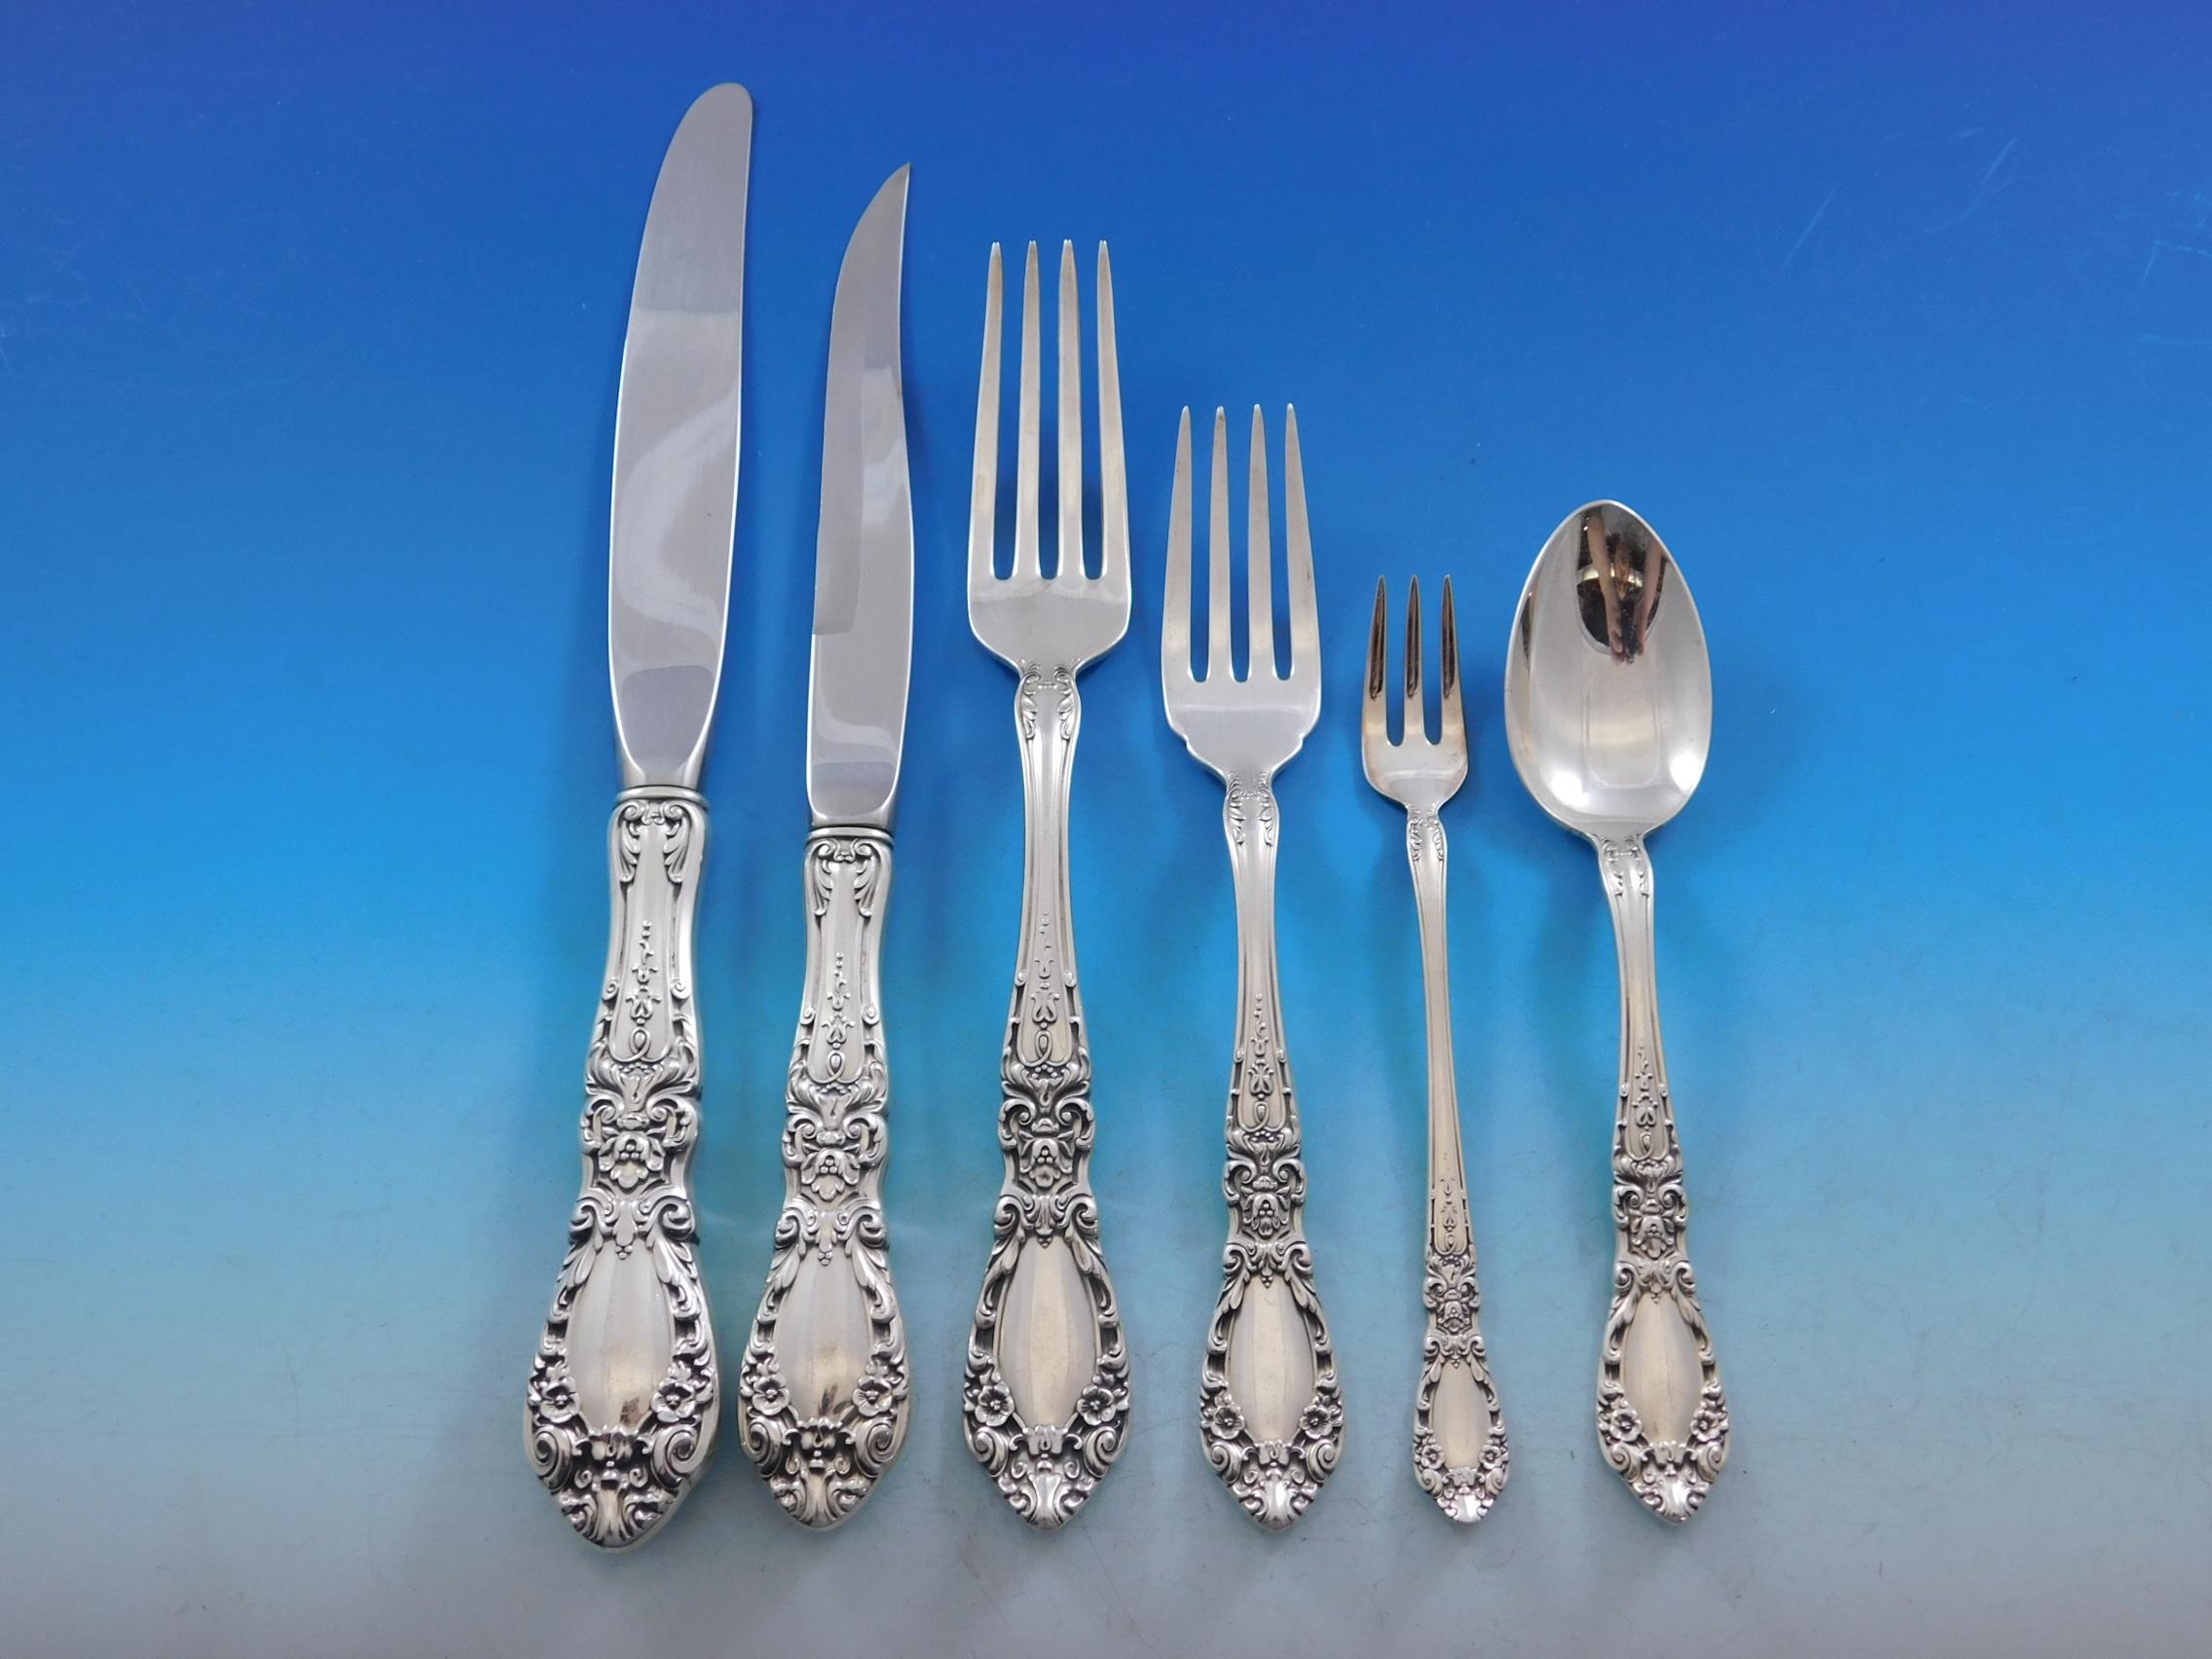 Fabulous dinner size Prince Eugene by Alvin sterling silver Flatware set, 76 pieces. The dinner fork and knife in this pattern are large and impressive. This set includes:

12 dinner size knives, 9 1/2